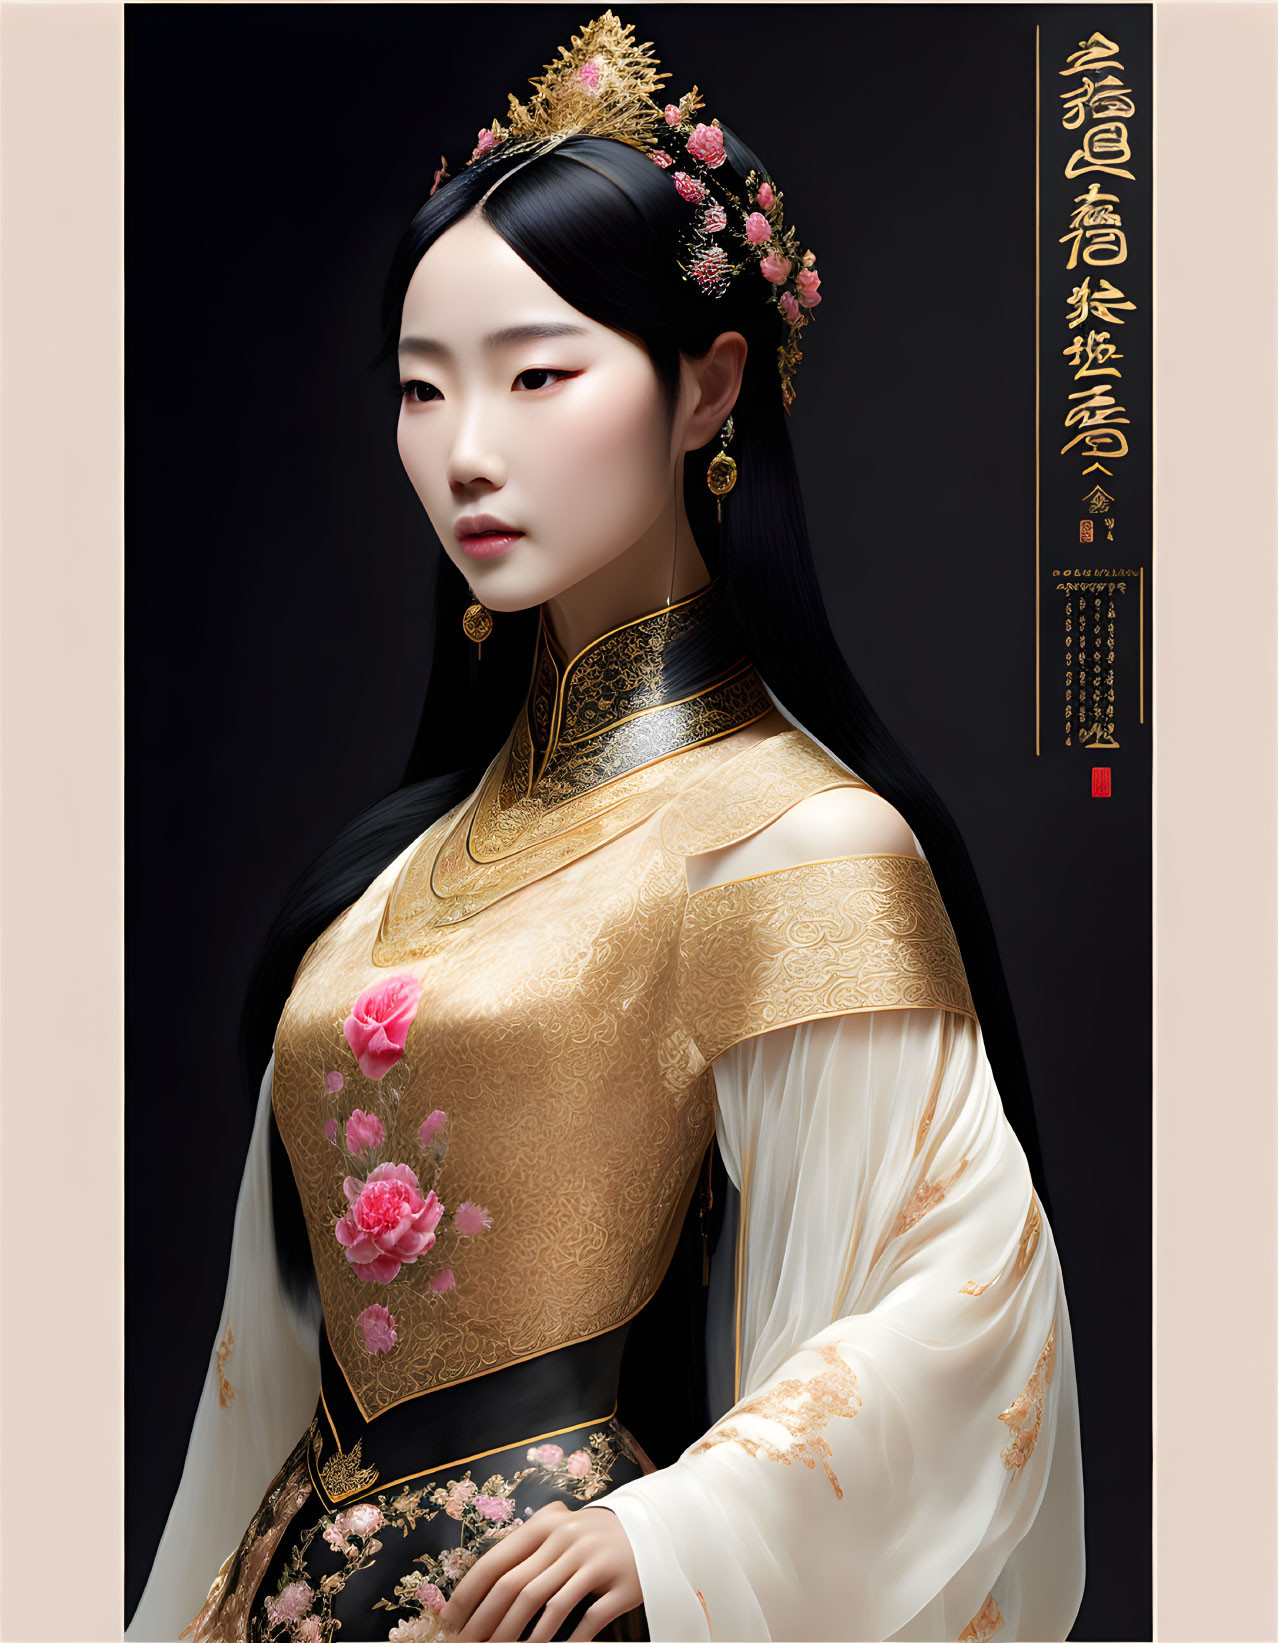 Detailed illustration of elegant woman in traditional Asian attire with gold embroidery, floral headpiece.